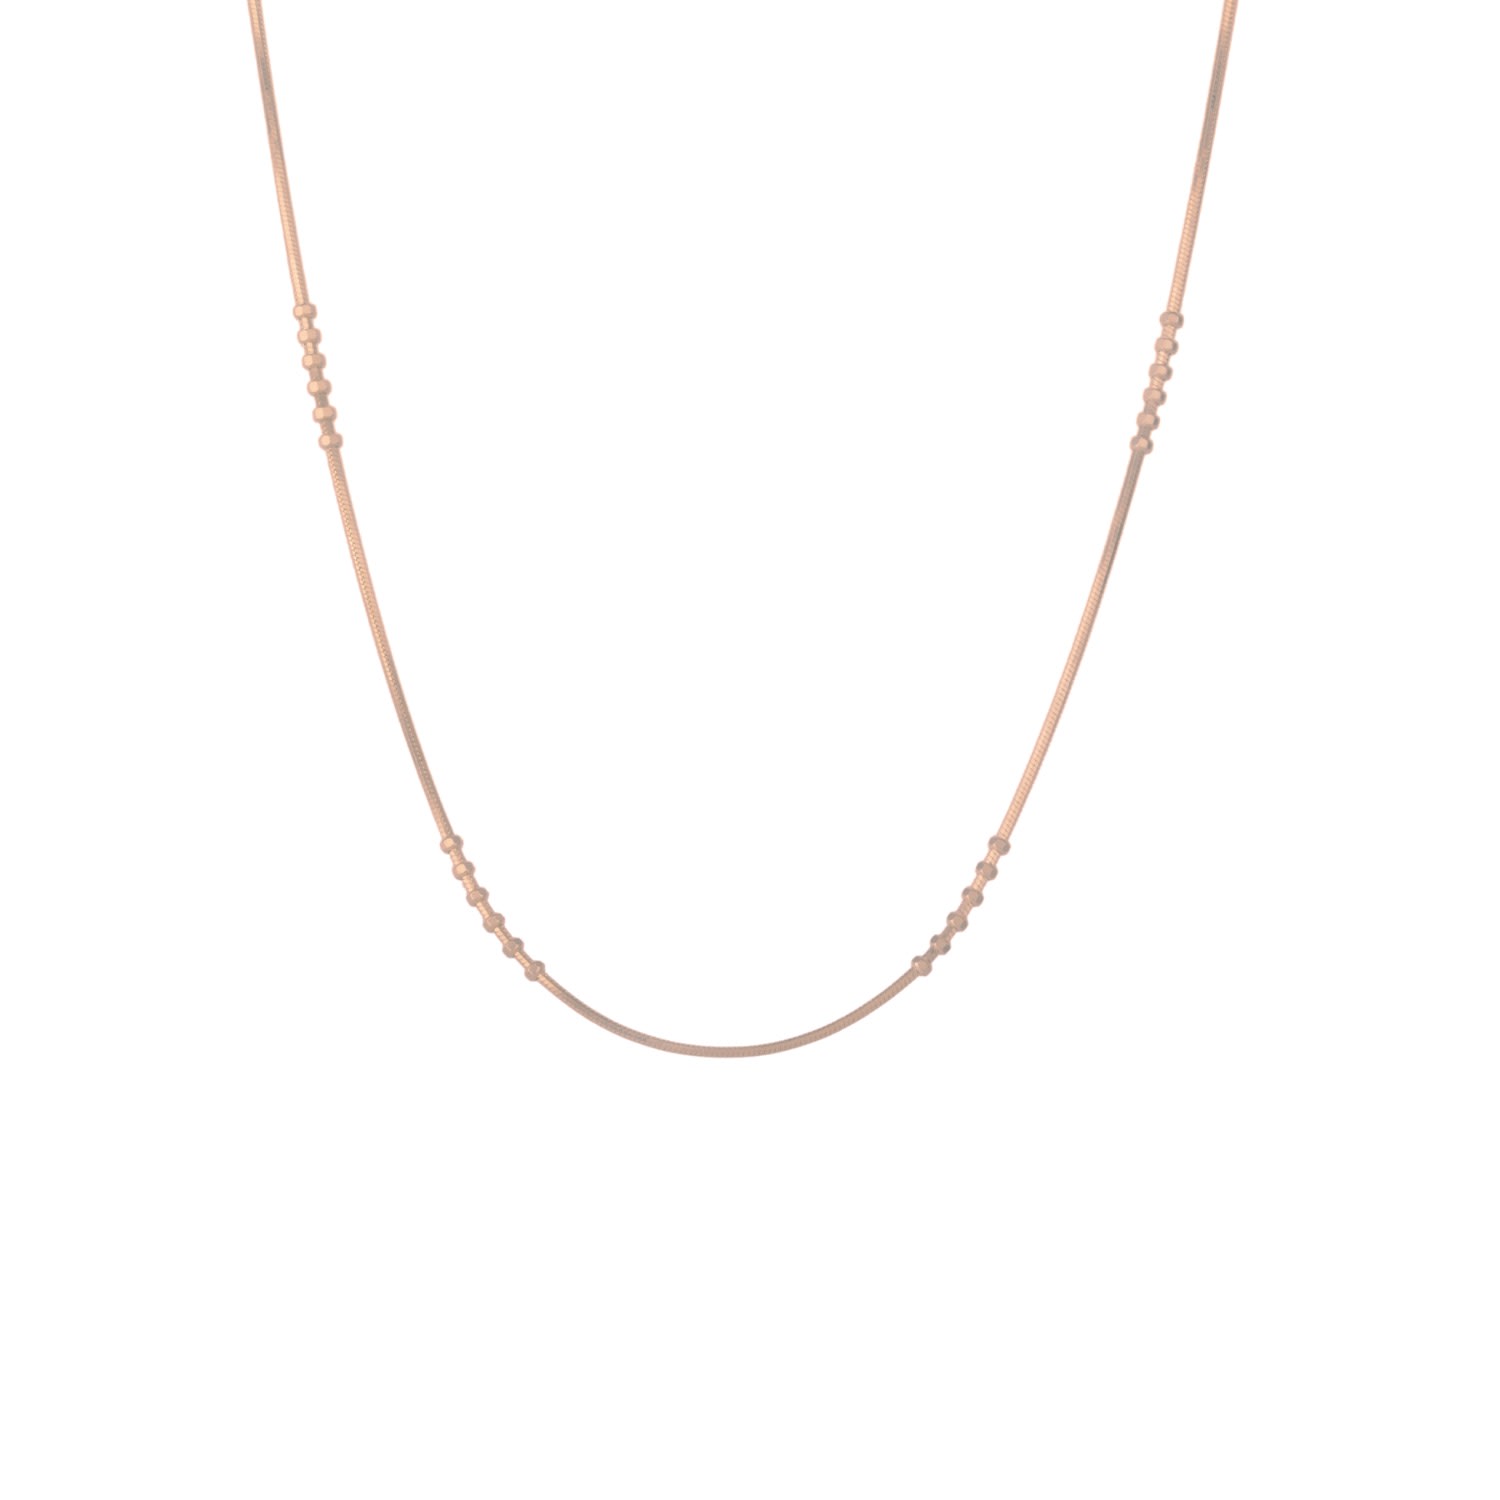 Women’s Six Beads Sterling Silver Necklace Chain - Rose Gold Spero London